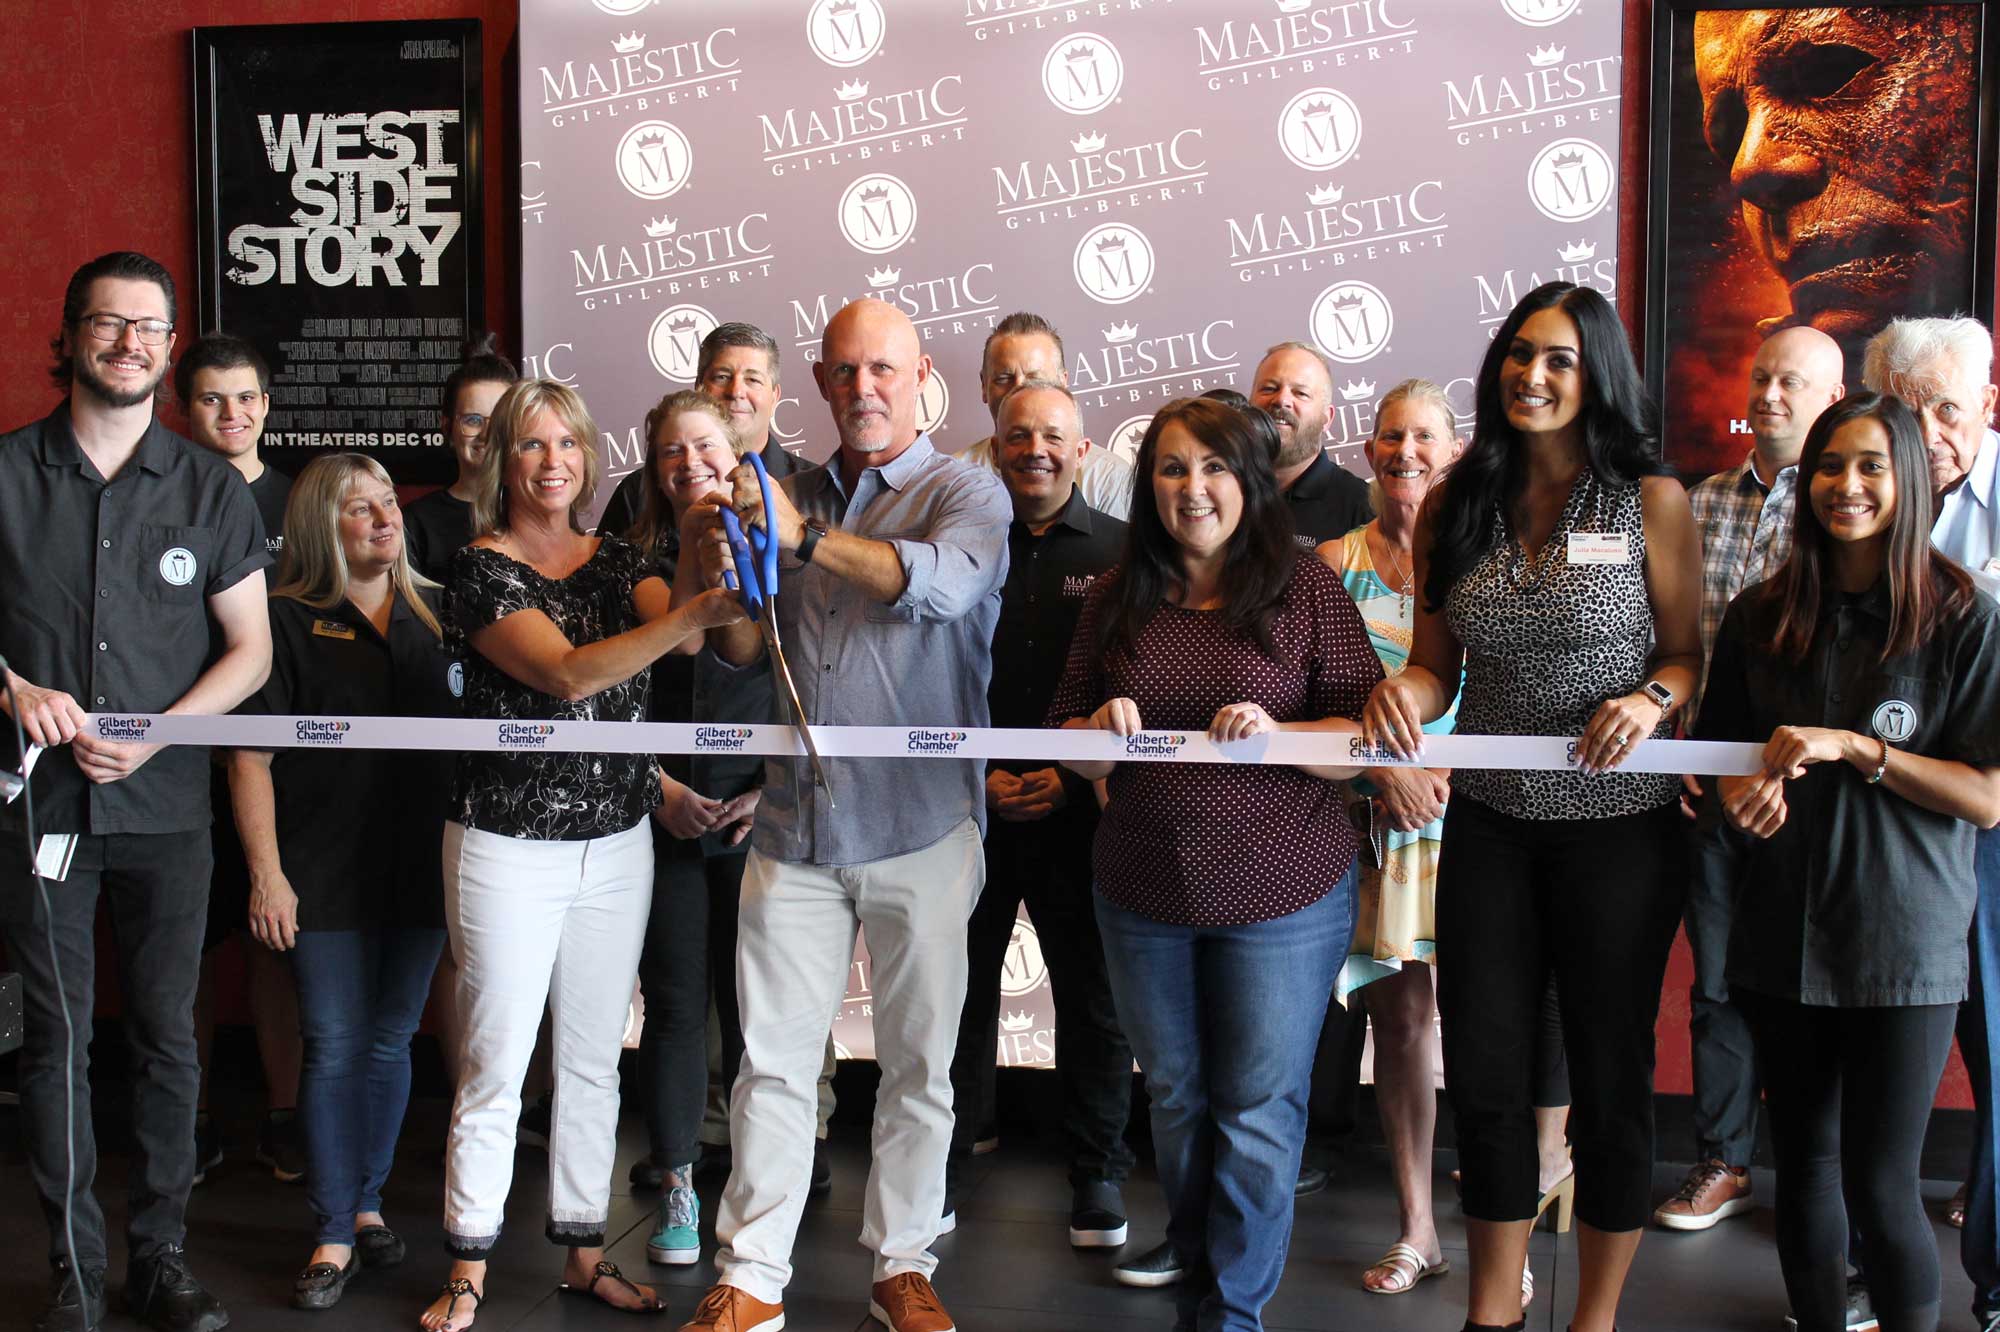 People at a ribbon cutting event at Majestic Gilbert